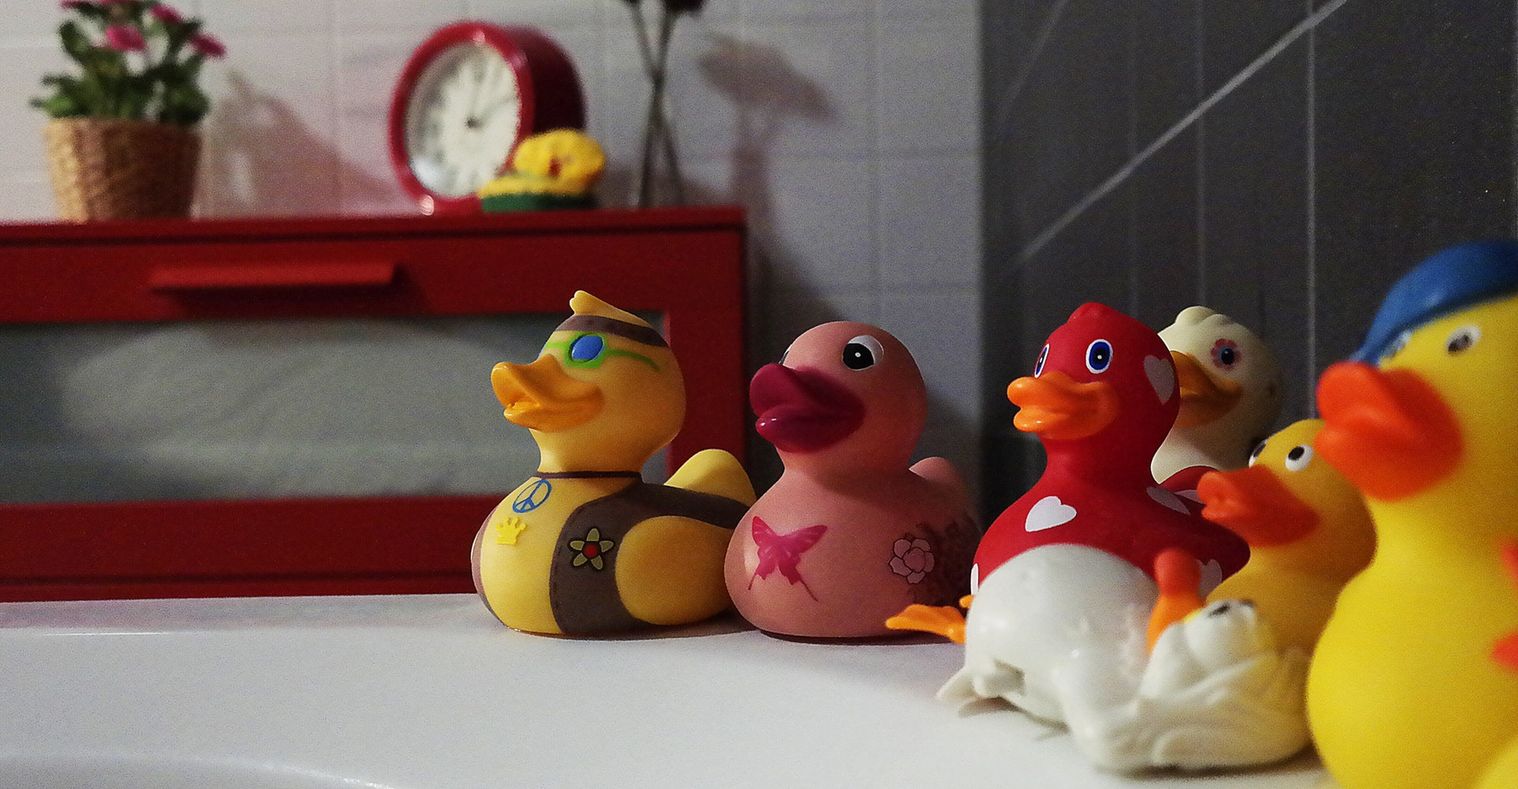 9 things you should be doing to keep bath time safe